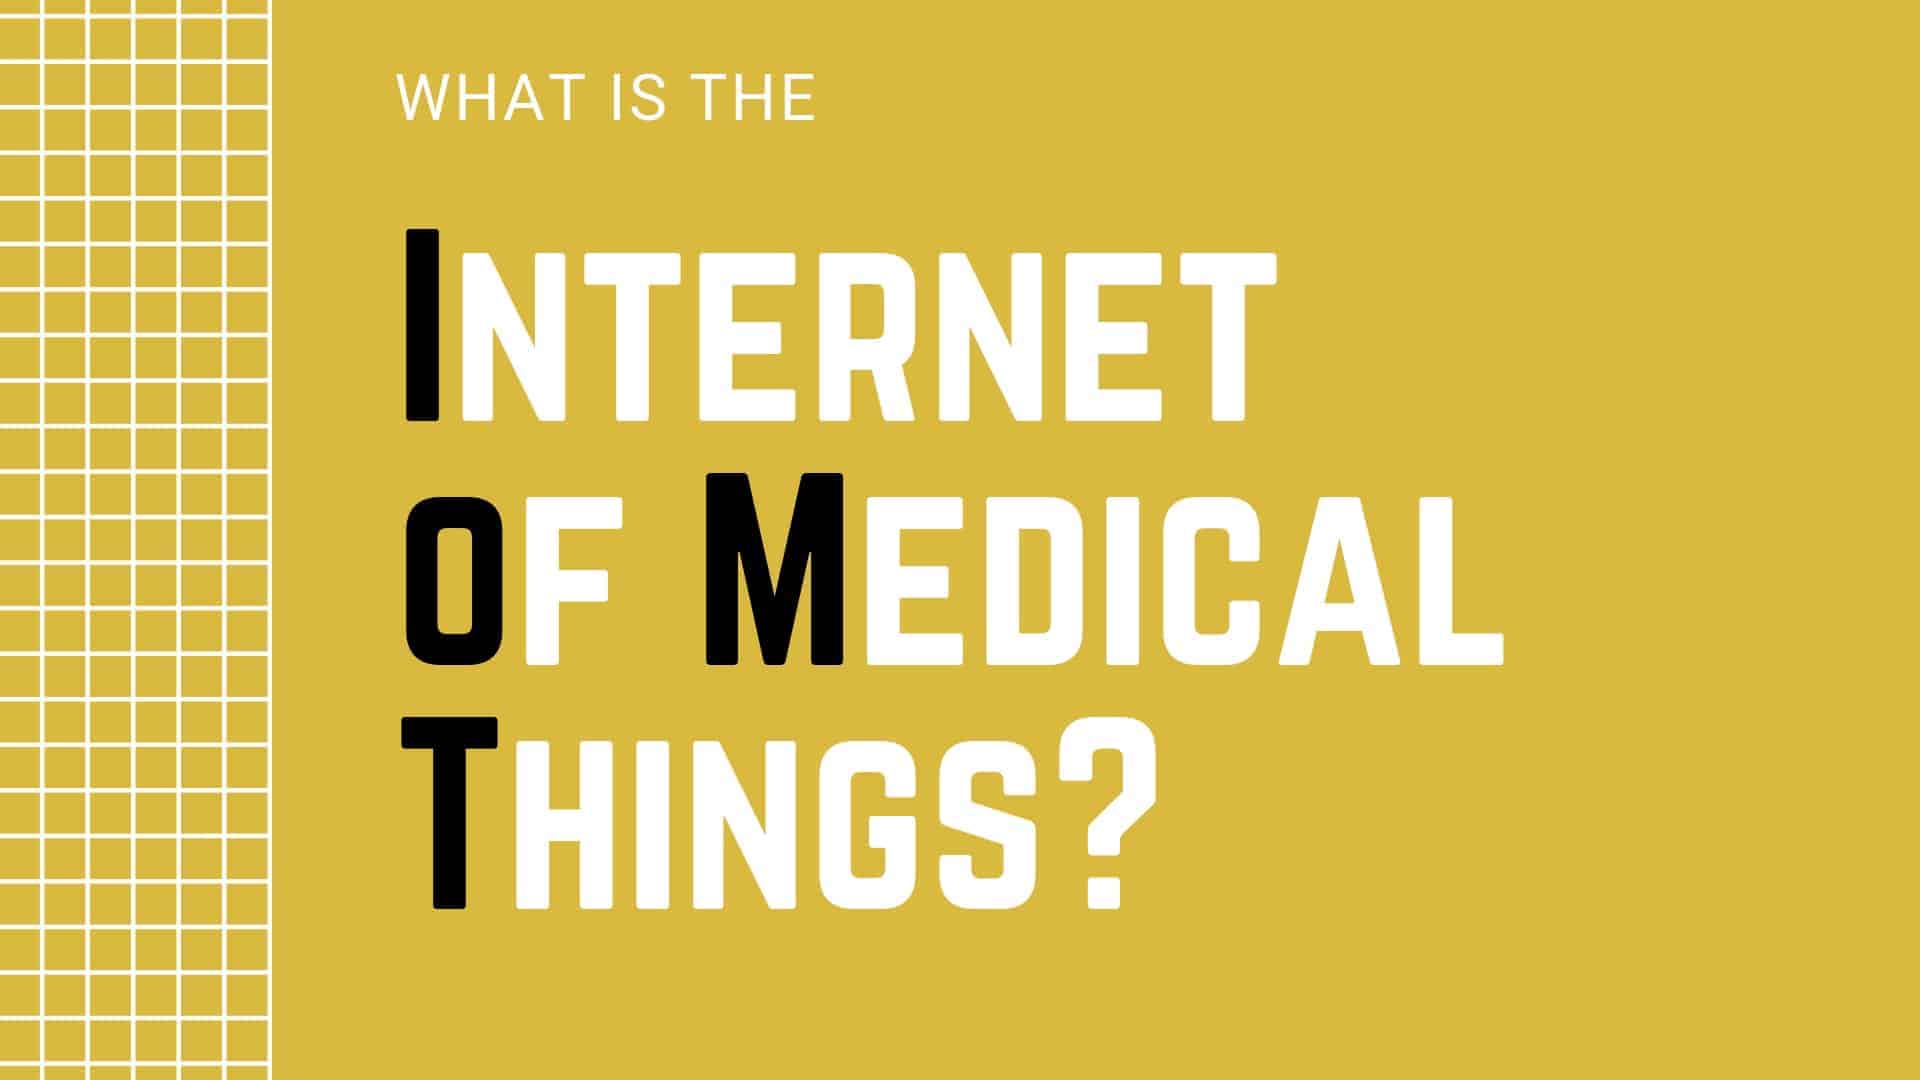 What is the Internet of Medical Things (IoMT)?